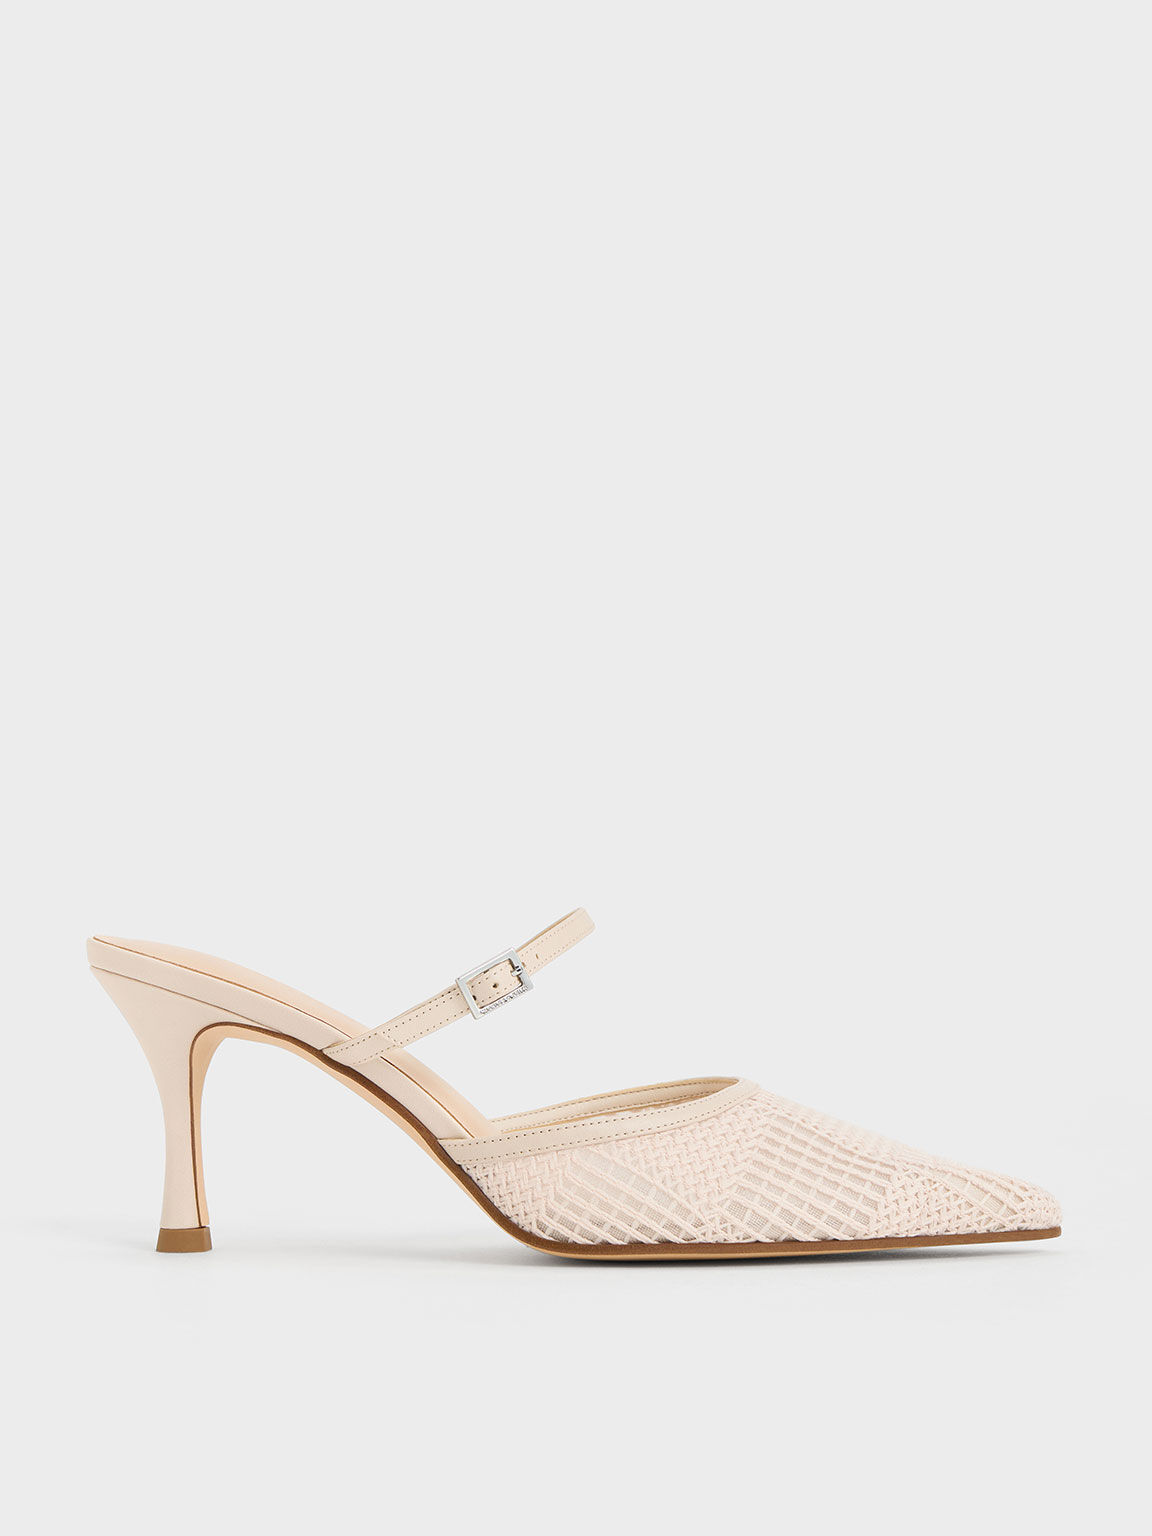 Women’s New Arrivals | Shop Latest Styles | CHARLES & KEITH US